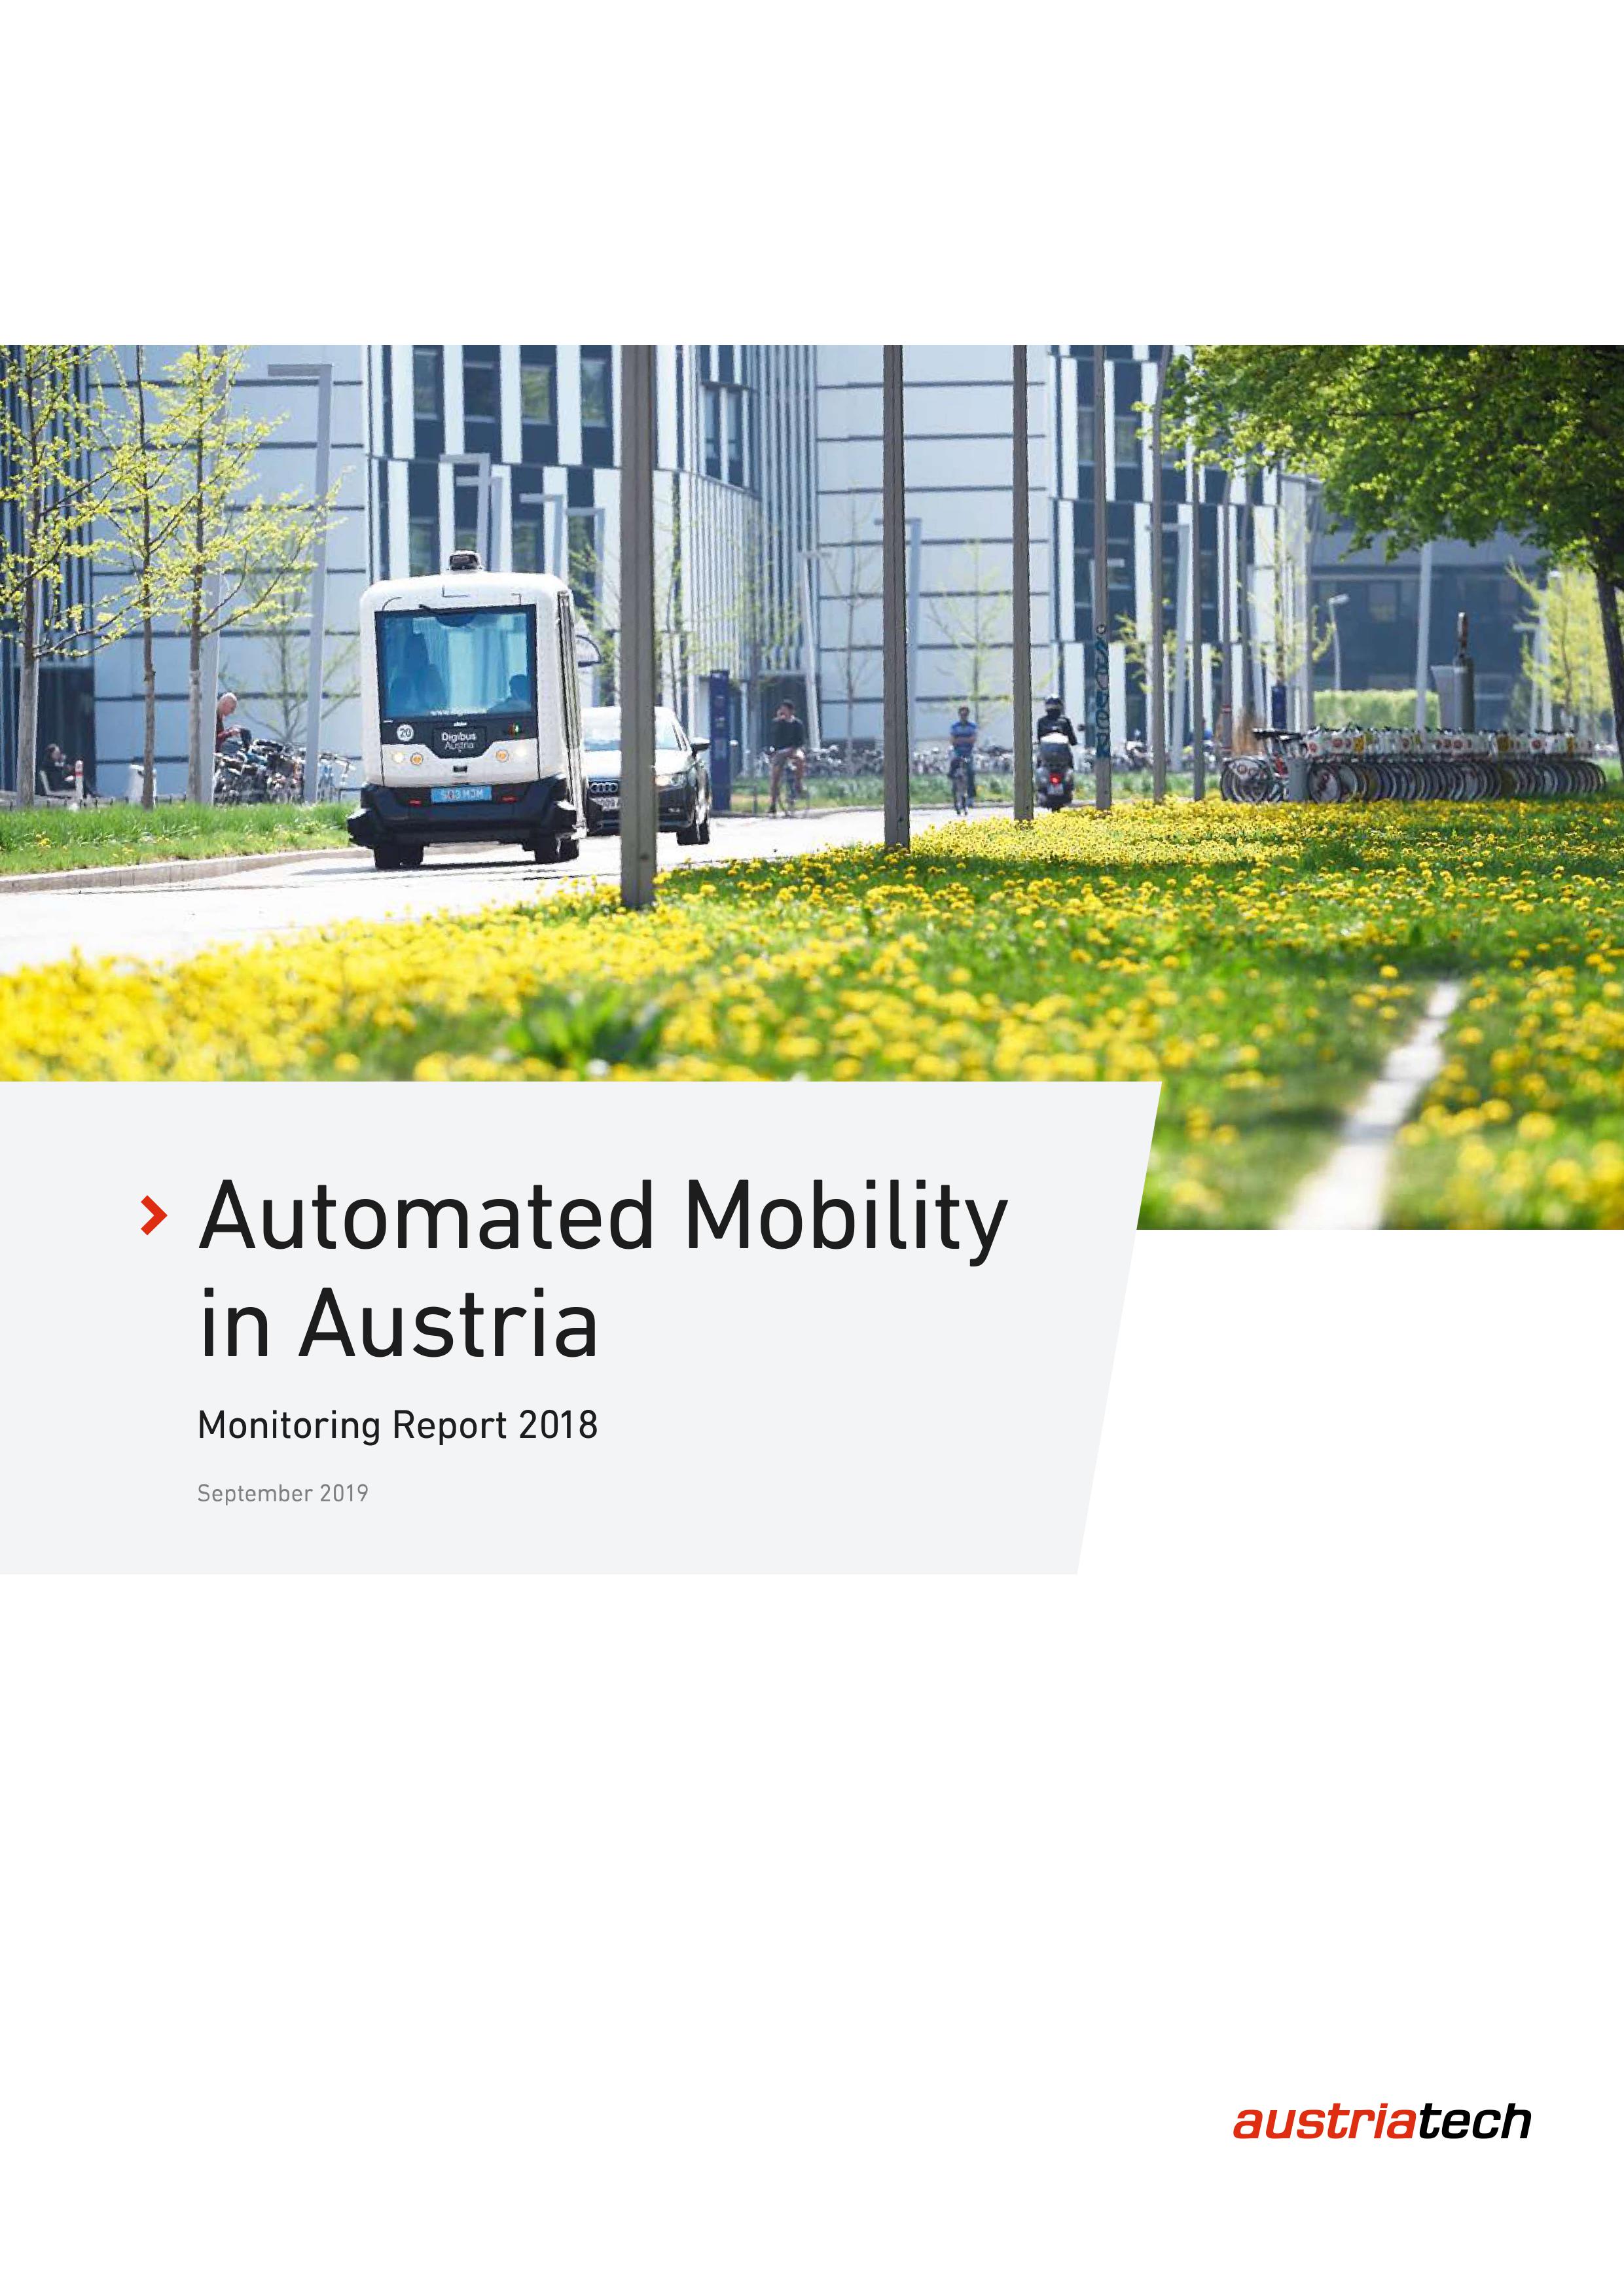 Automated Mobility in Austria Monitoring Report 2018